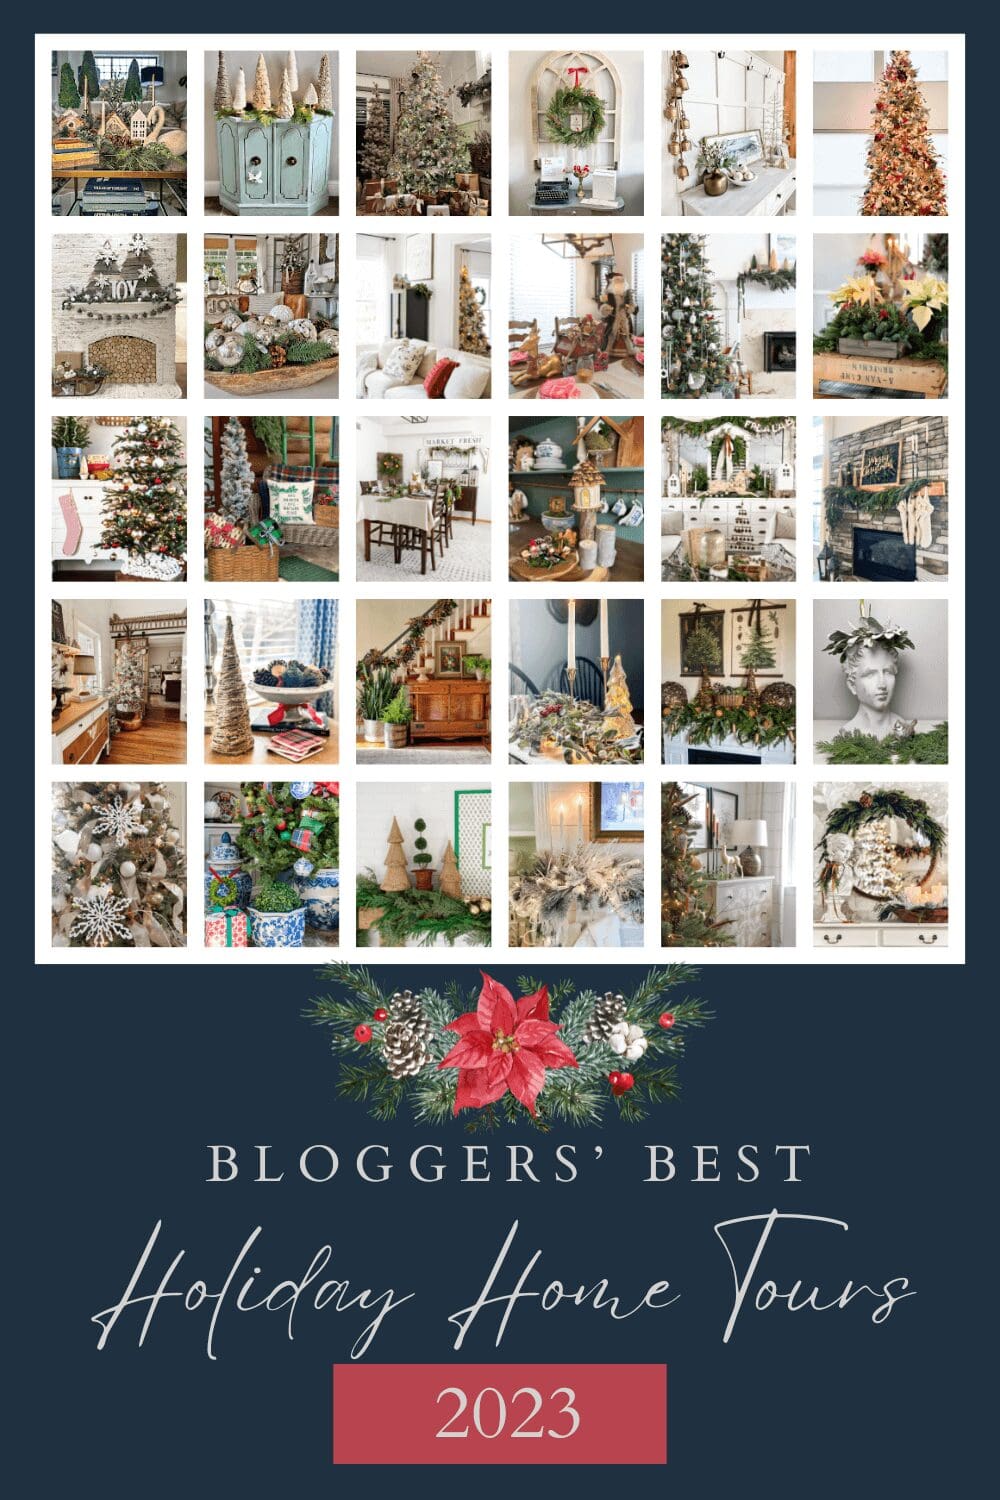 blog hop collage of different bloggers and their posts